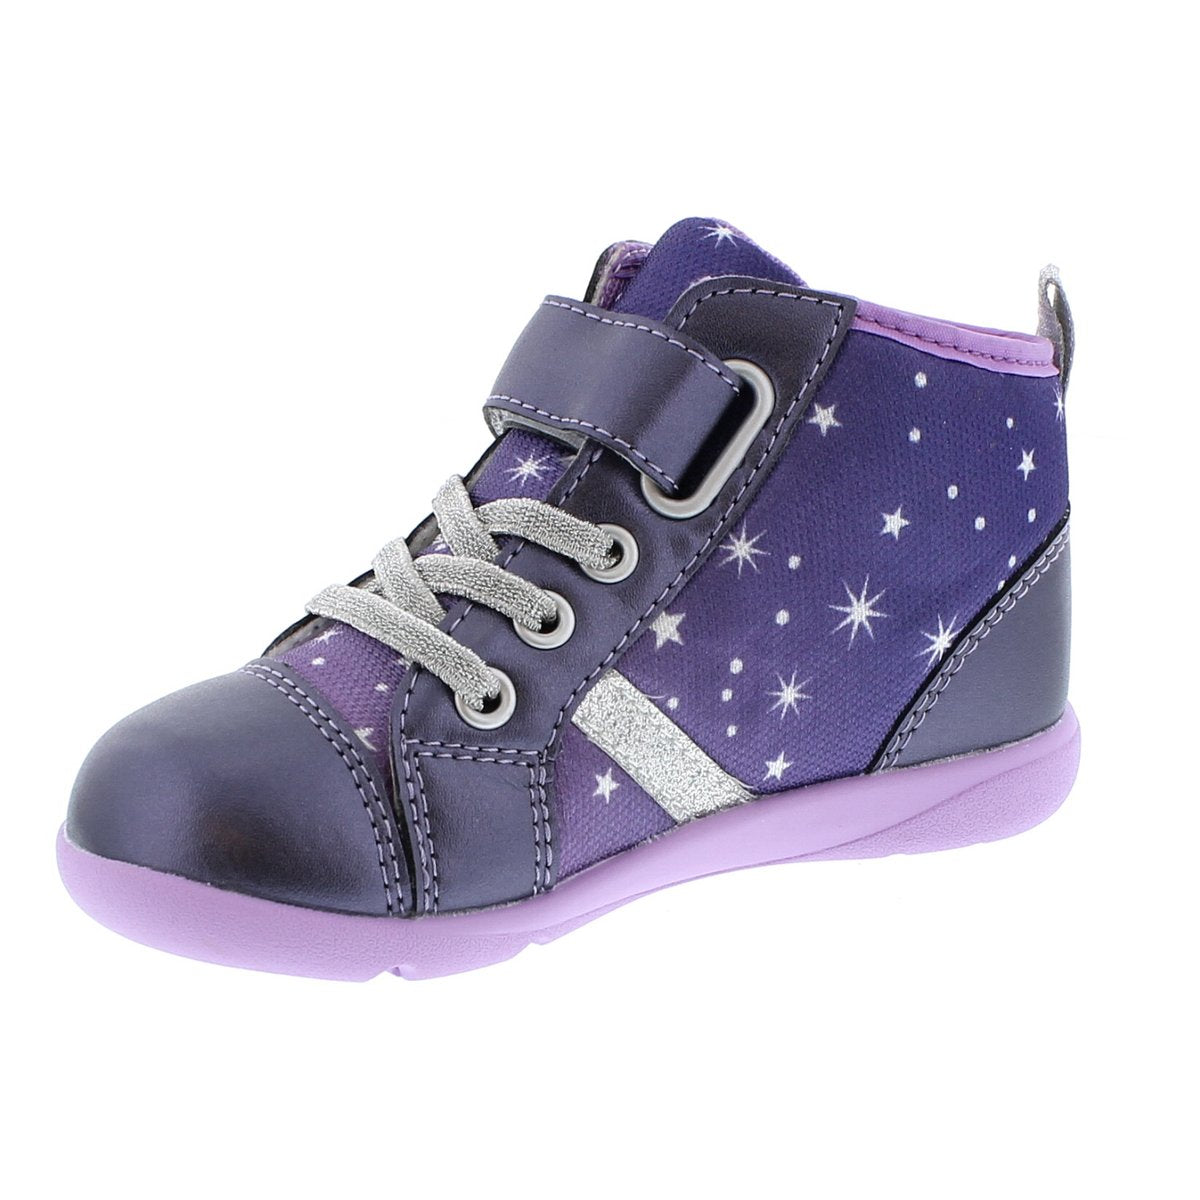 Child Tsukihoshi Star Sneaker in Navy/Purple from the front view